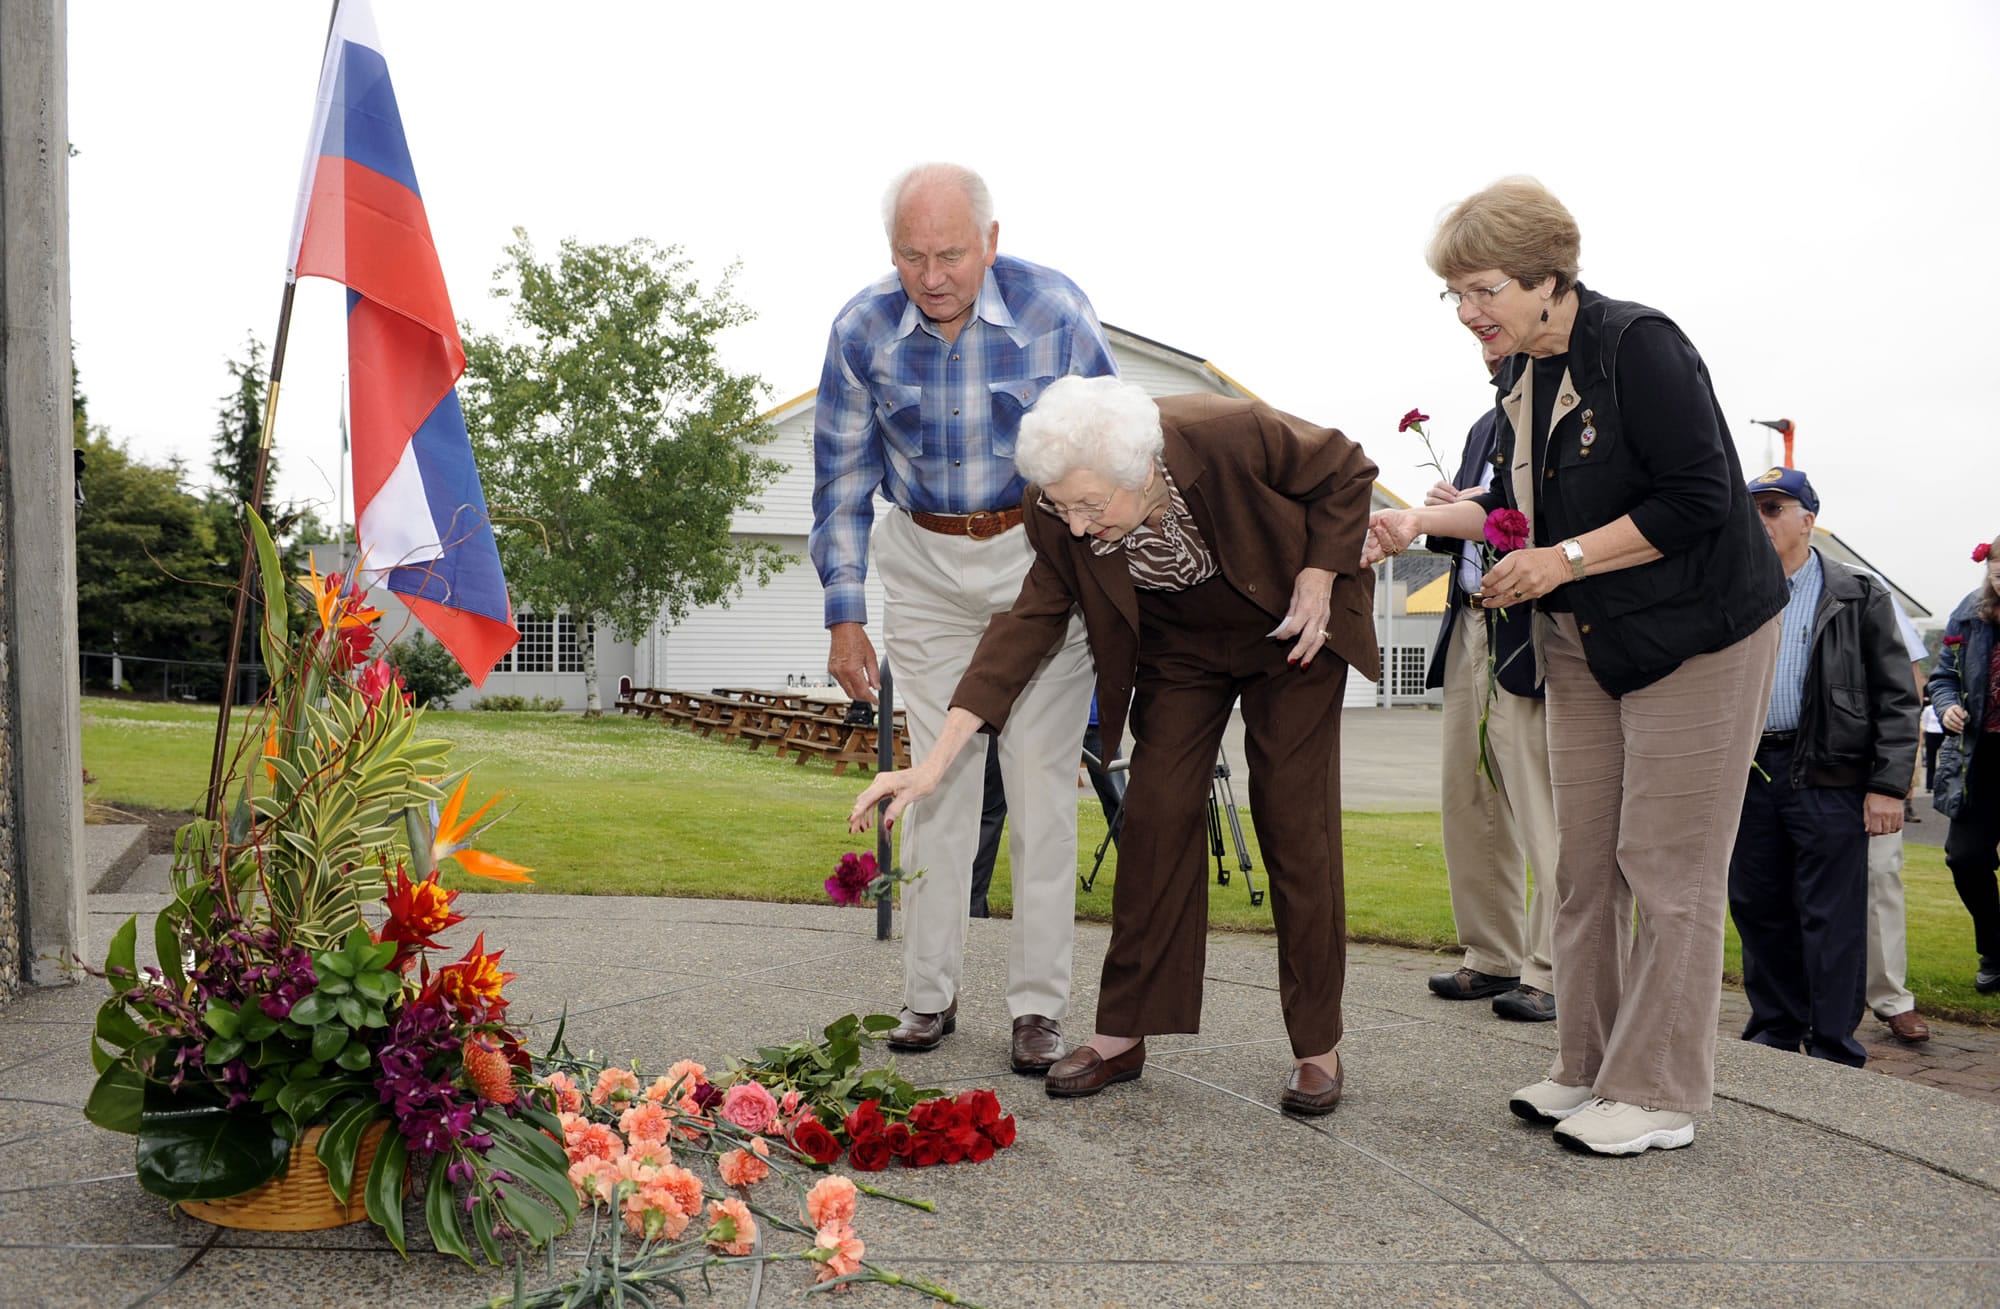 Former State Rep. Val Ogden, center, with Robert Buker, left, and Gayle Rothrock, place flowers at the Transpolar Flight Monument on Wednesday.